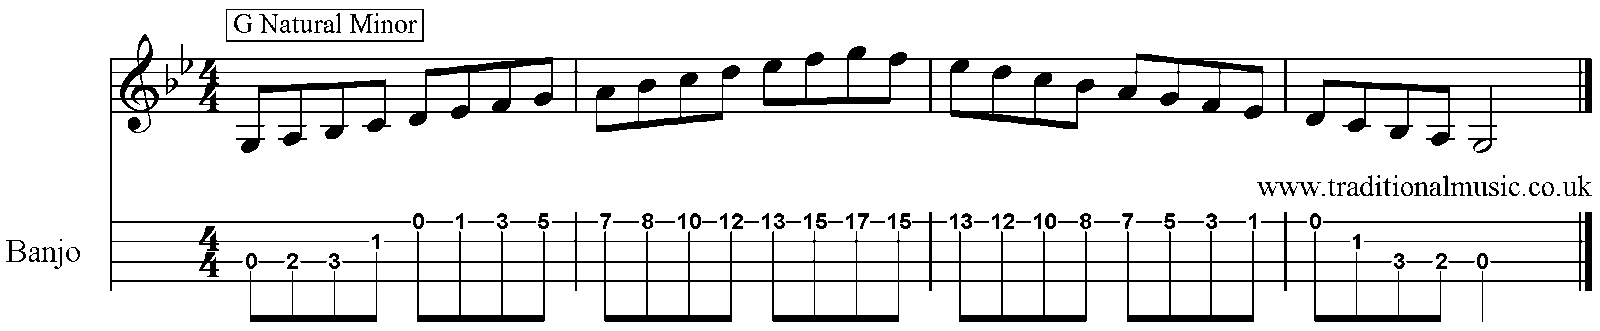 Minor Scales for Banjo A